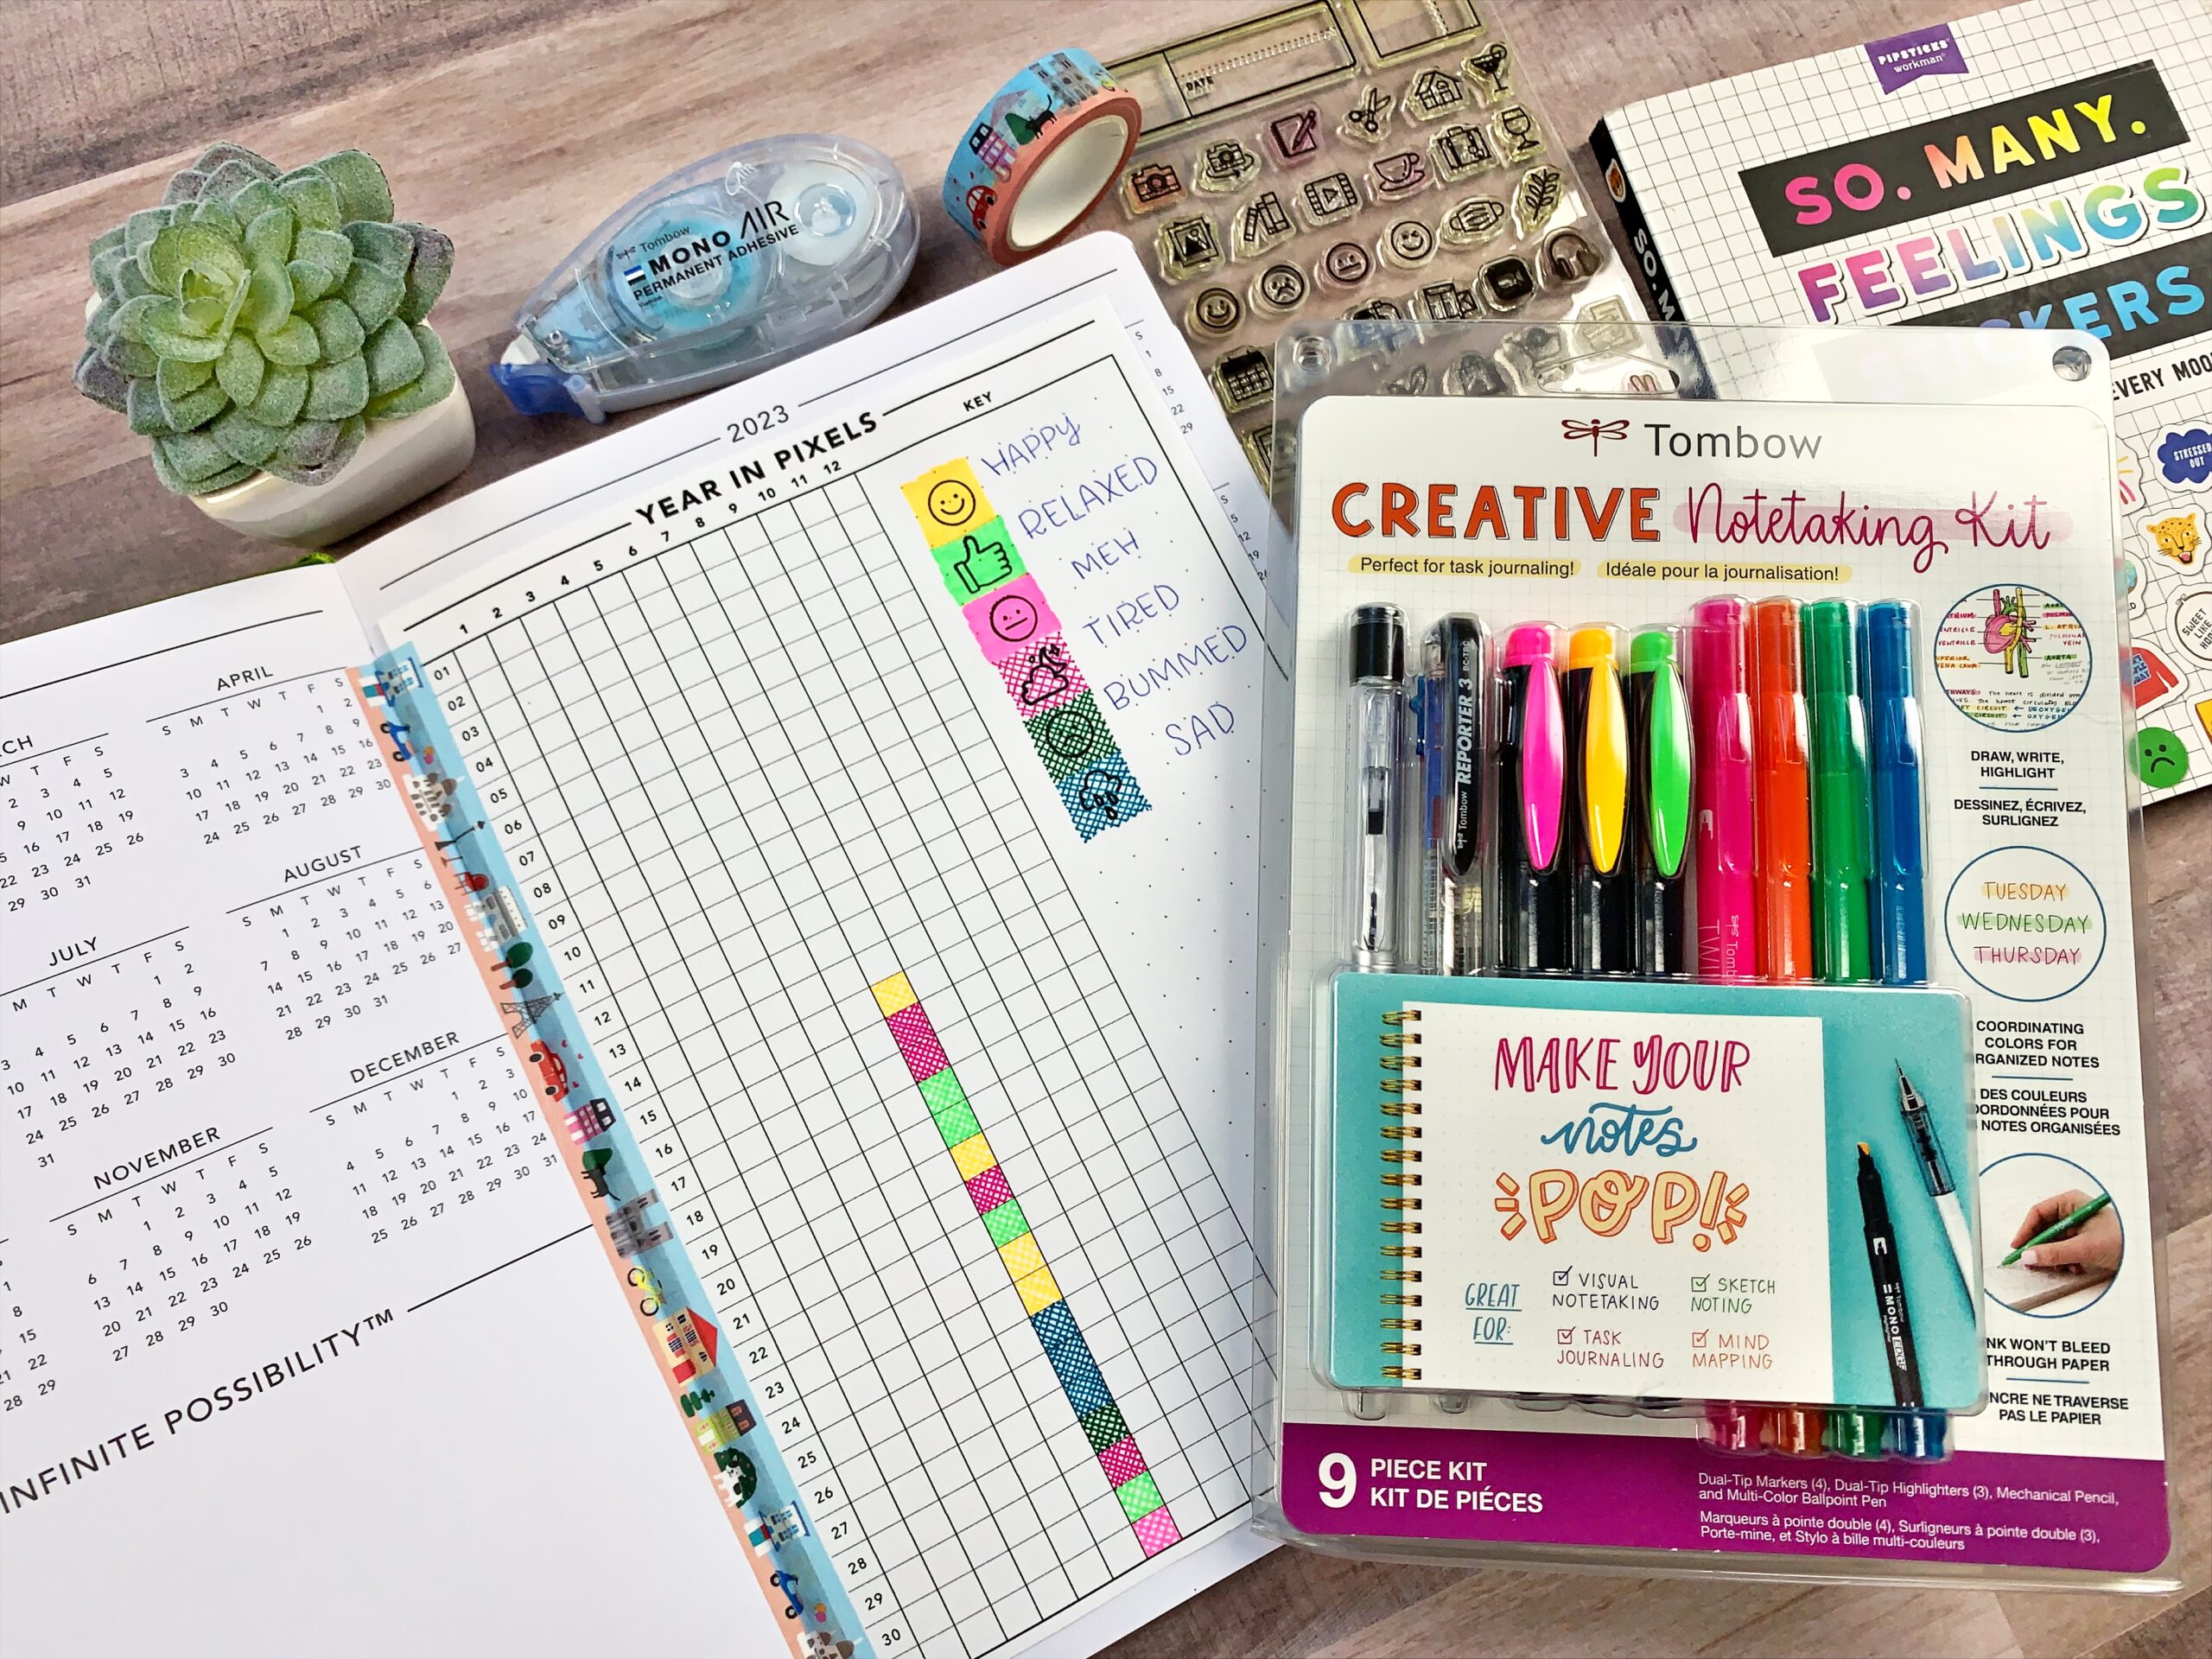 http://blog.tombowusa.com/2022/08/03/five-passion-planner-printables-to-use-with-the-creative-notetaking-kit/5-passion-planner-printables-to-use-with-the-tombow-creative-notetaking-kit-by-jennie-garcia-001/